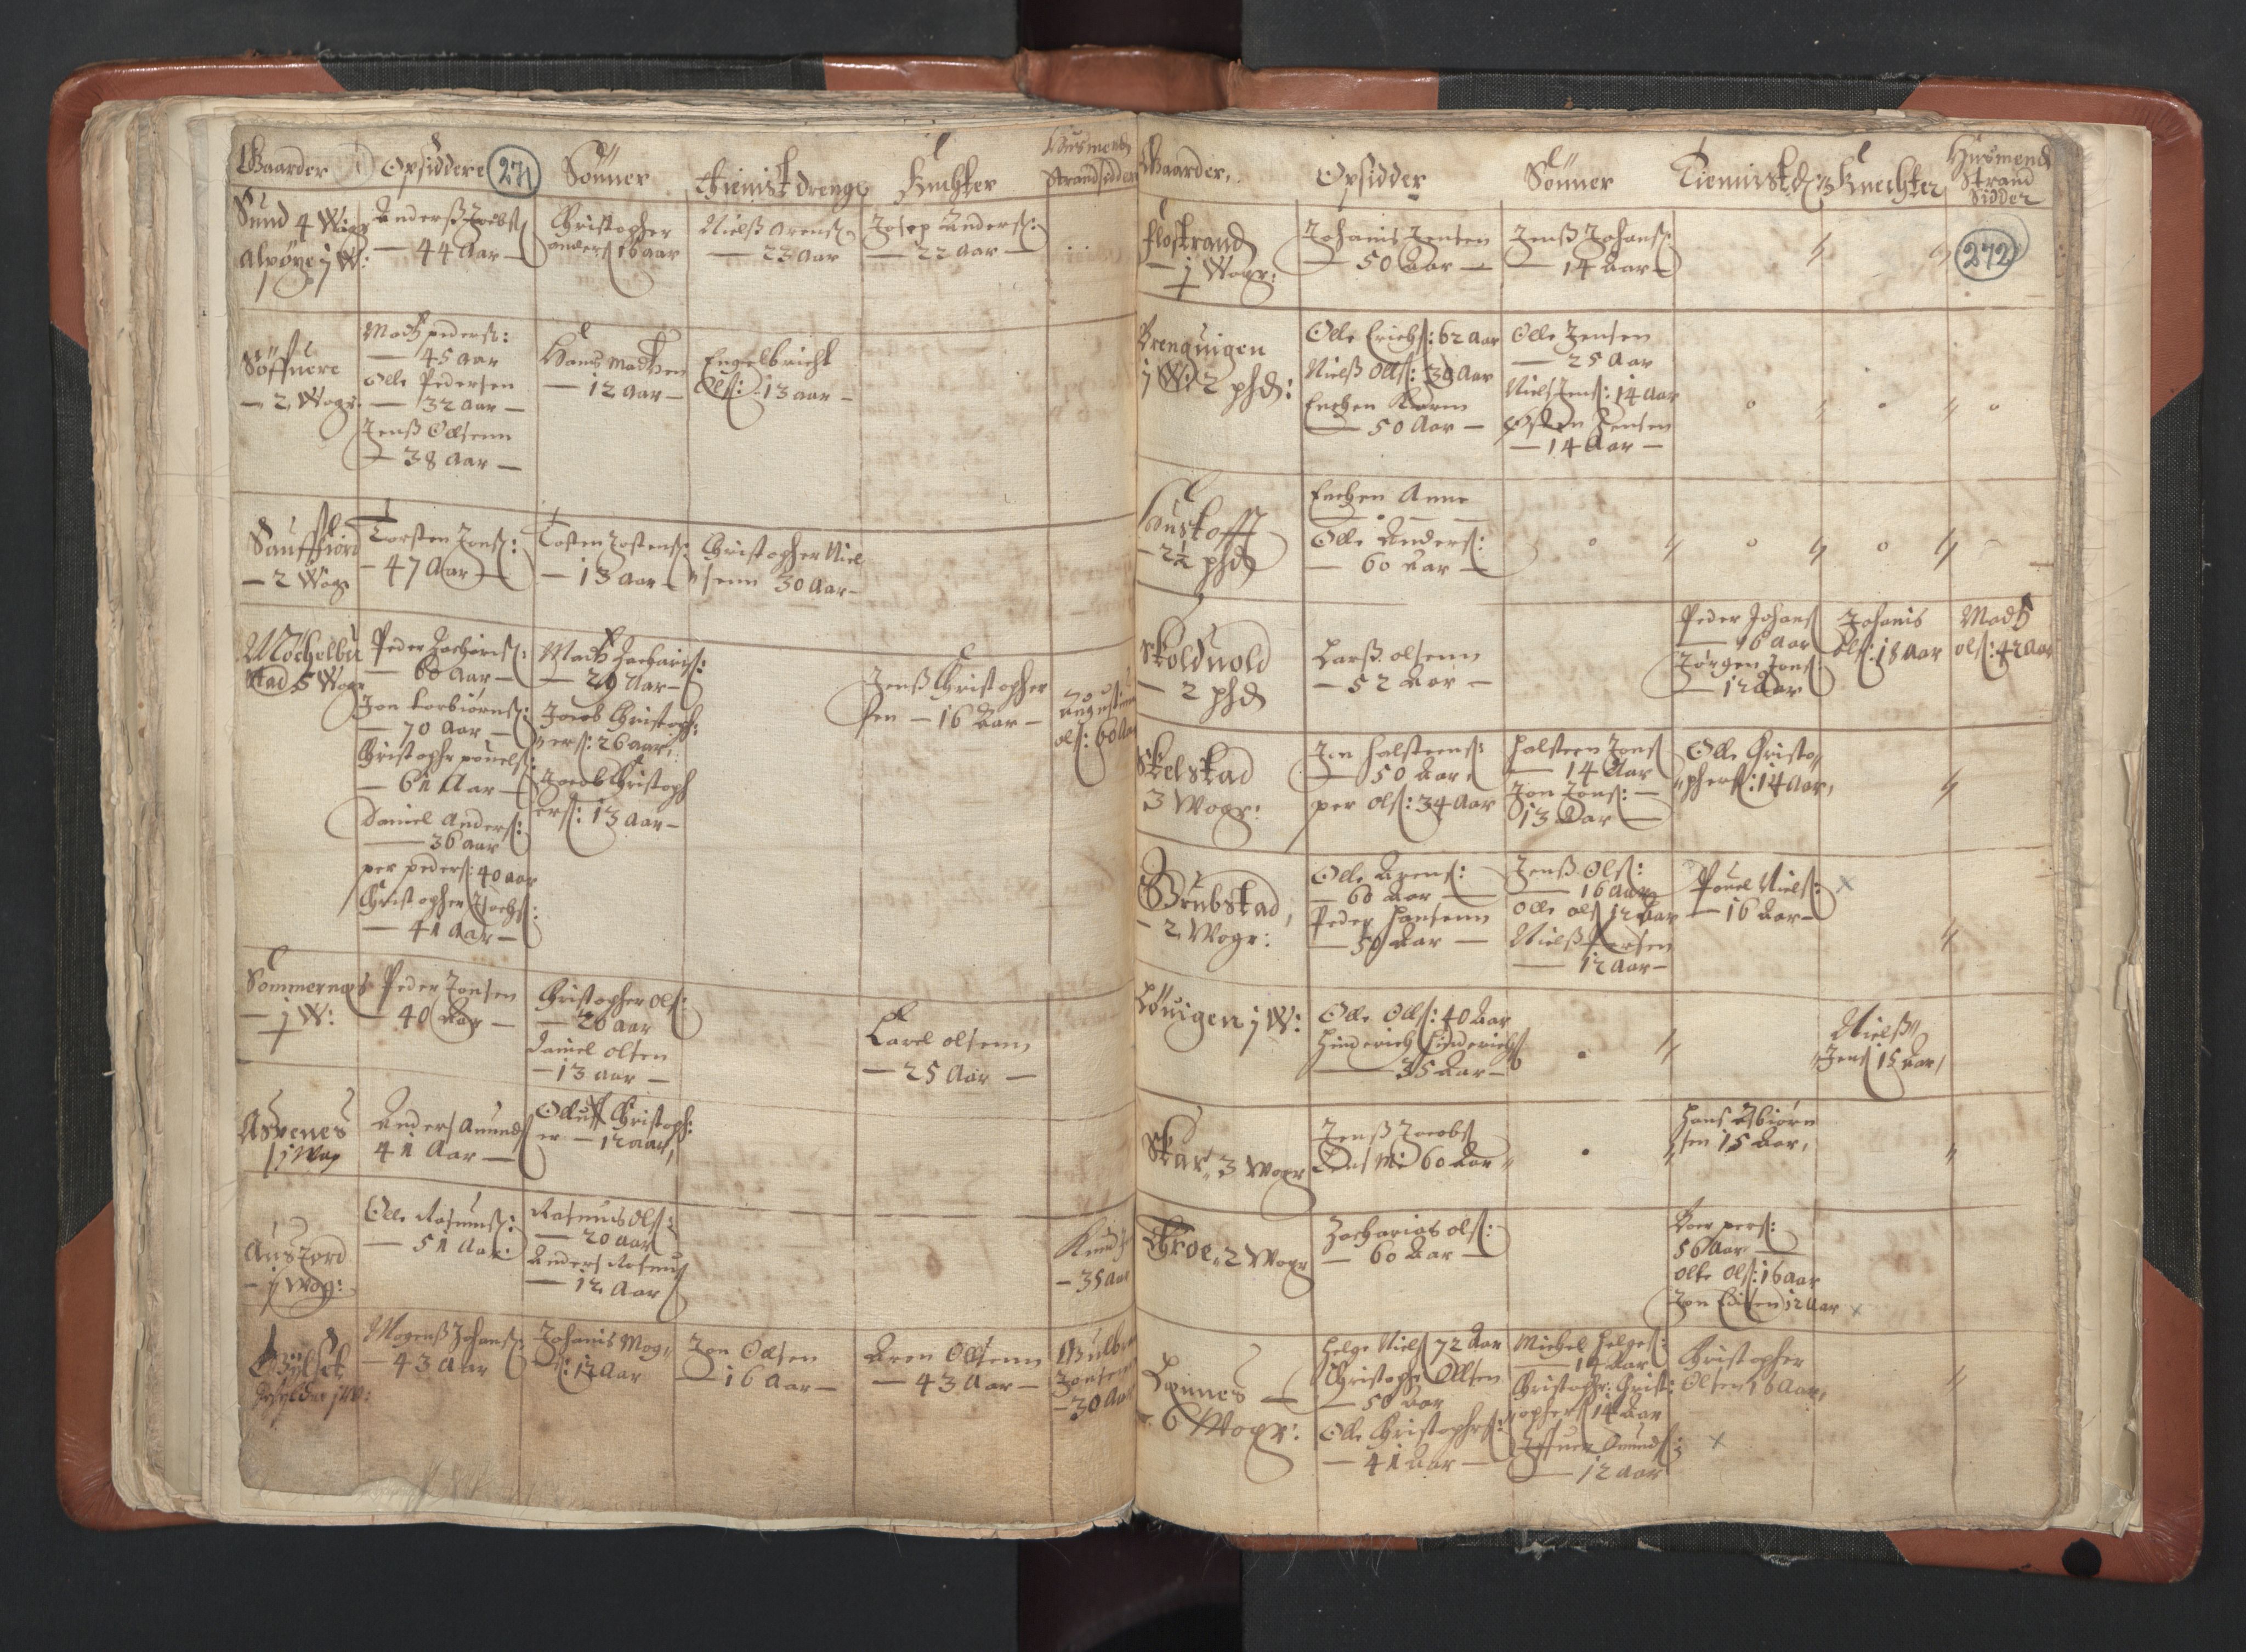 RA, Vicar's Census 1664-1666, no. 35: Helgeland deanery and Salten deanery, 1664-1666, p. 271-272